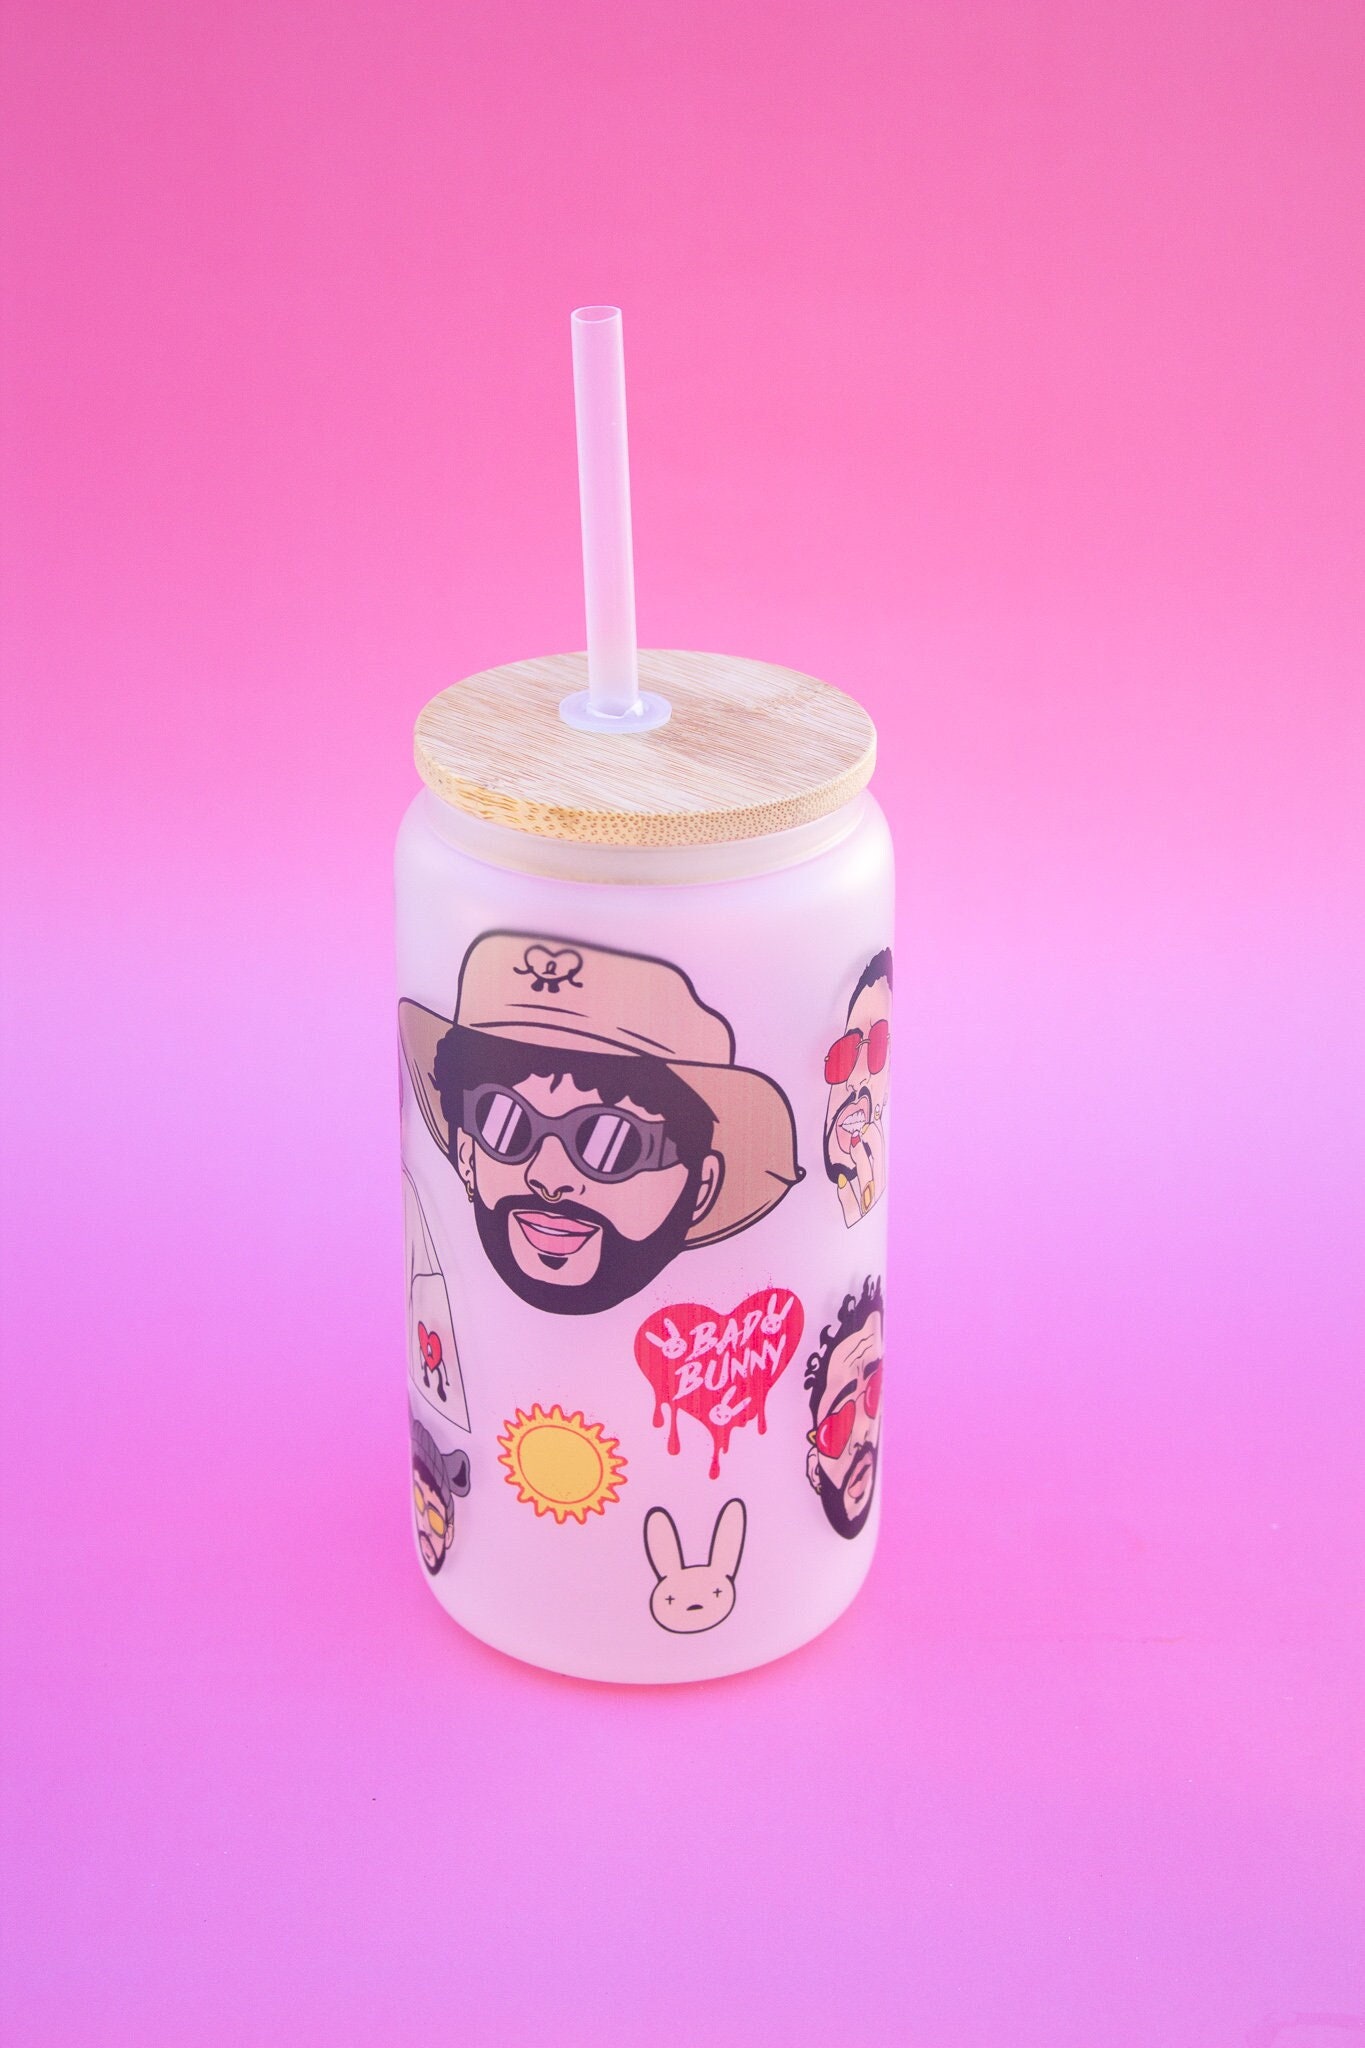 1PCS PVC New Bad Bunny Straw Topper Reusable Preventing Spillage Casual  Straw Cover Dessert Drinks Cups Dustproof Decoration